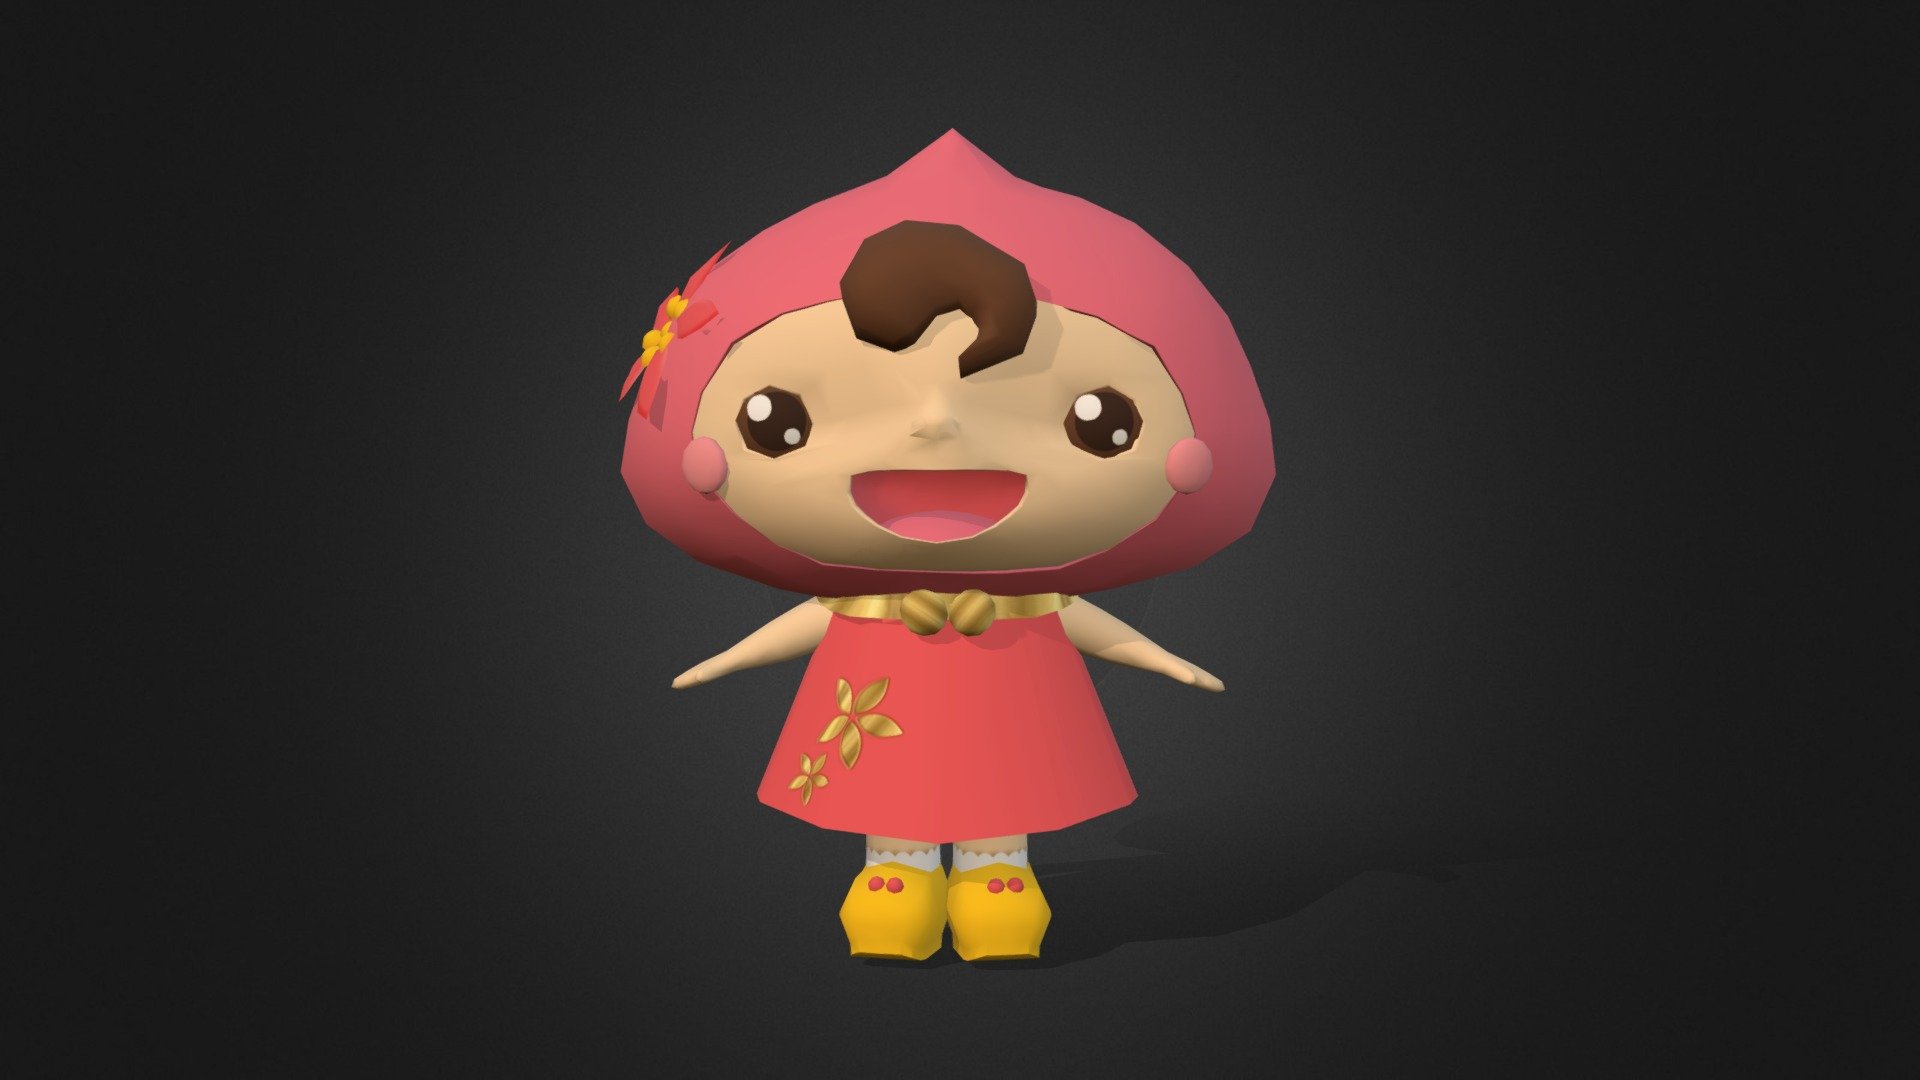 Cartoonish bby doll
Low poly character 
it can be used for games ,AR or VR - Baby Doll - 3D model by App Mechanic (@appm) 3d model